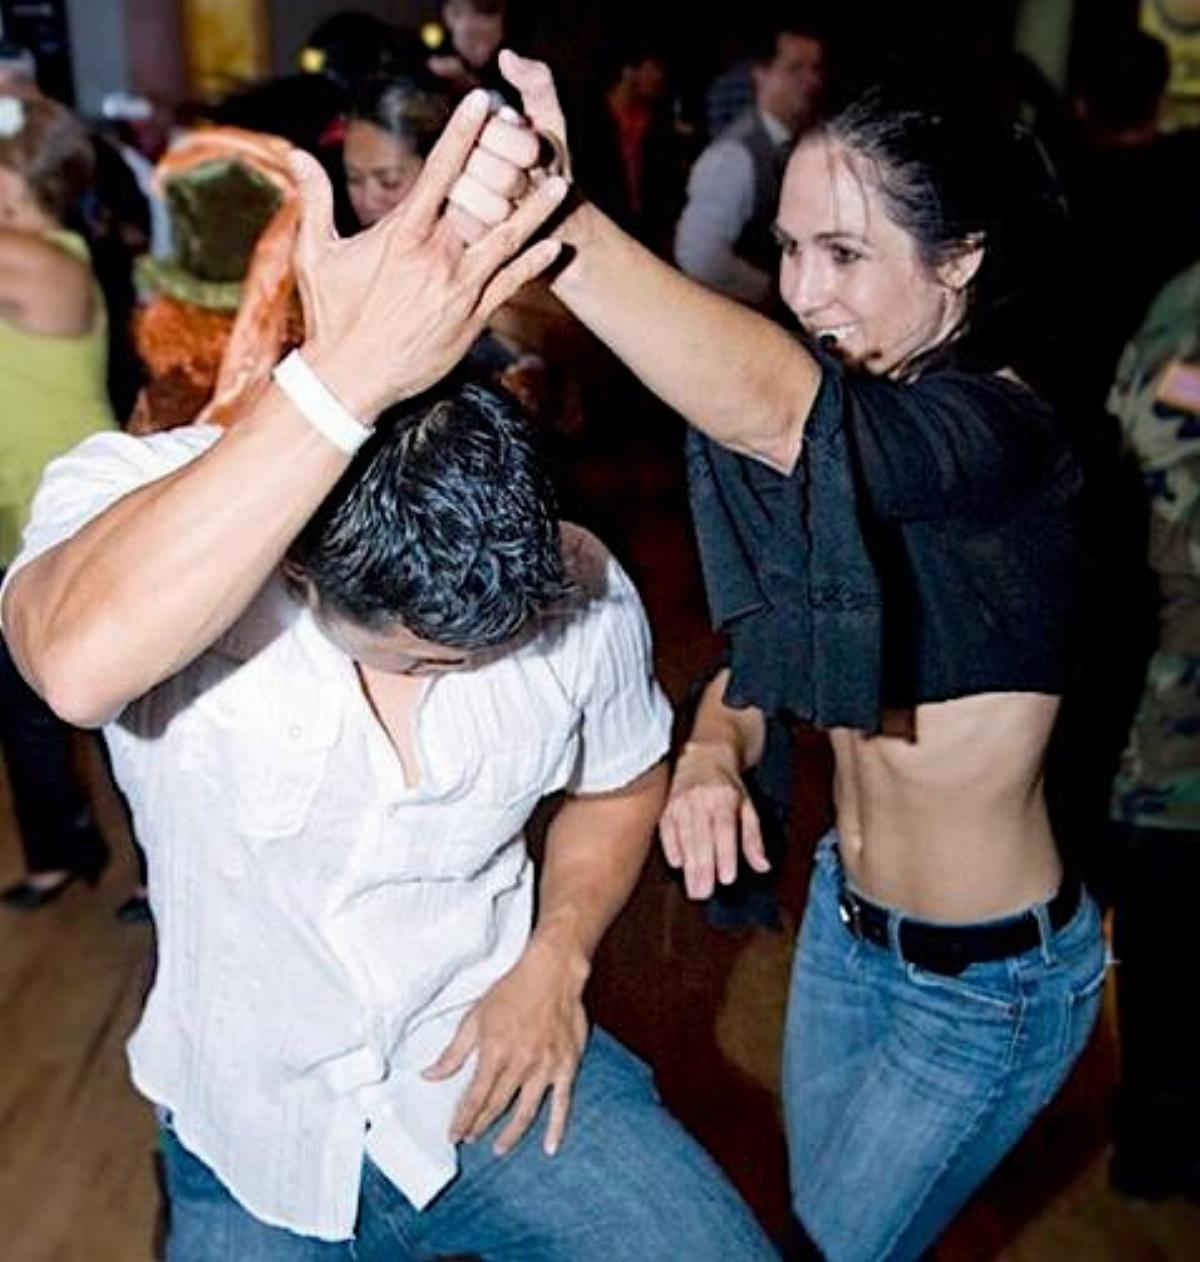 SALSA DANCING in the EAST BAY on MONDAY NIGHTS!